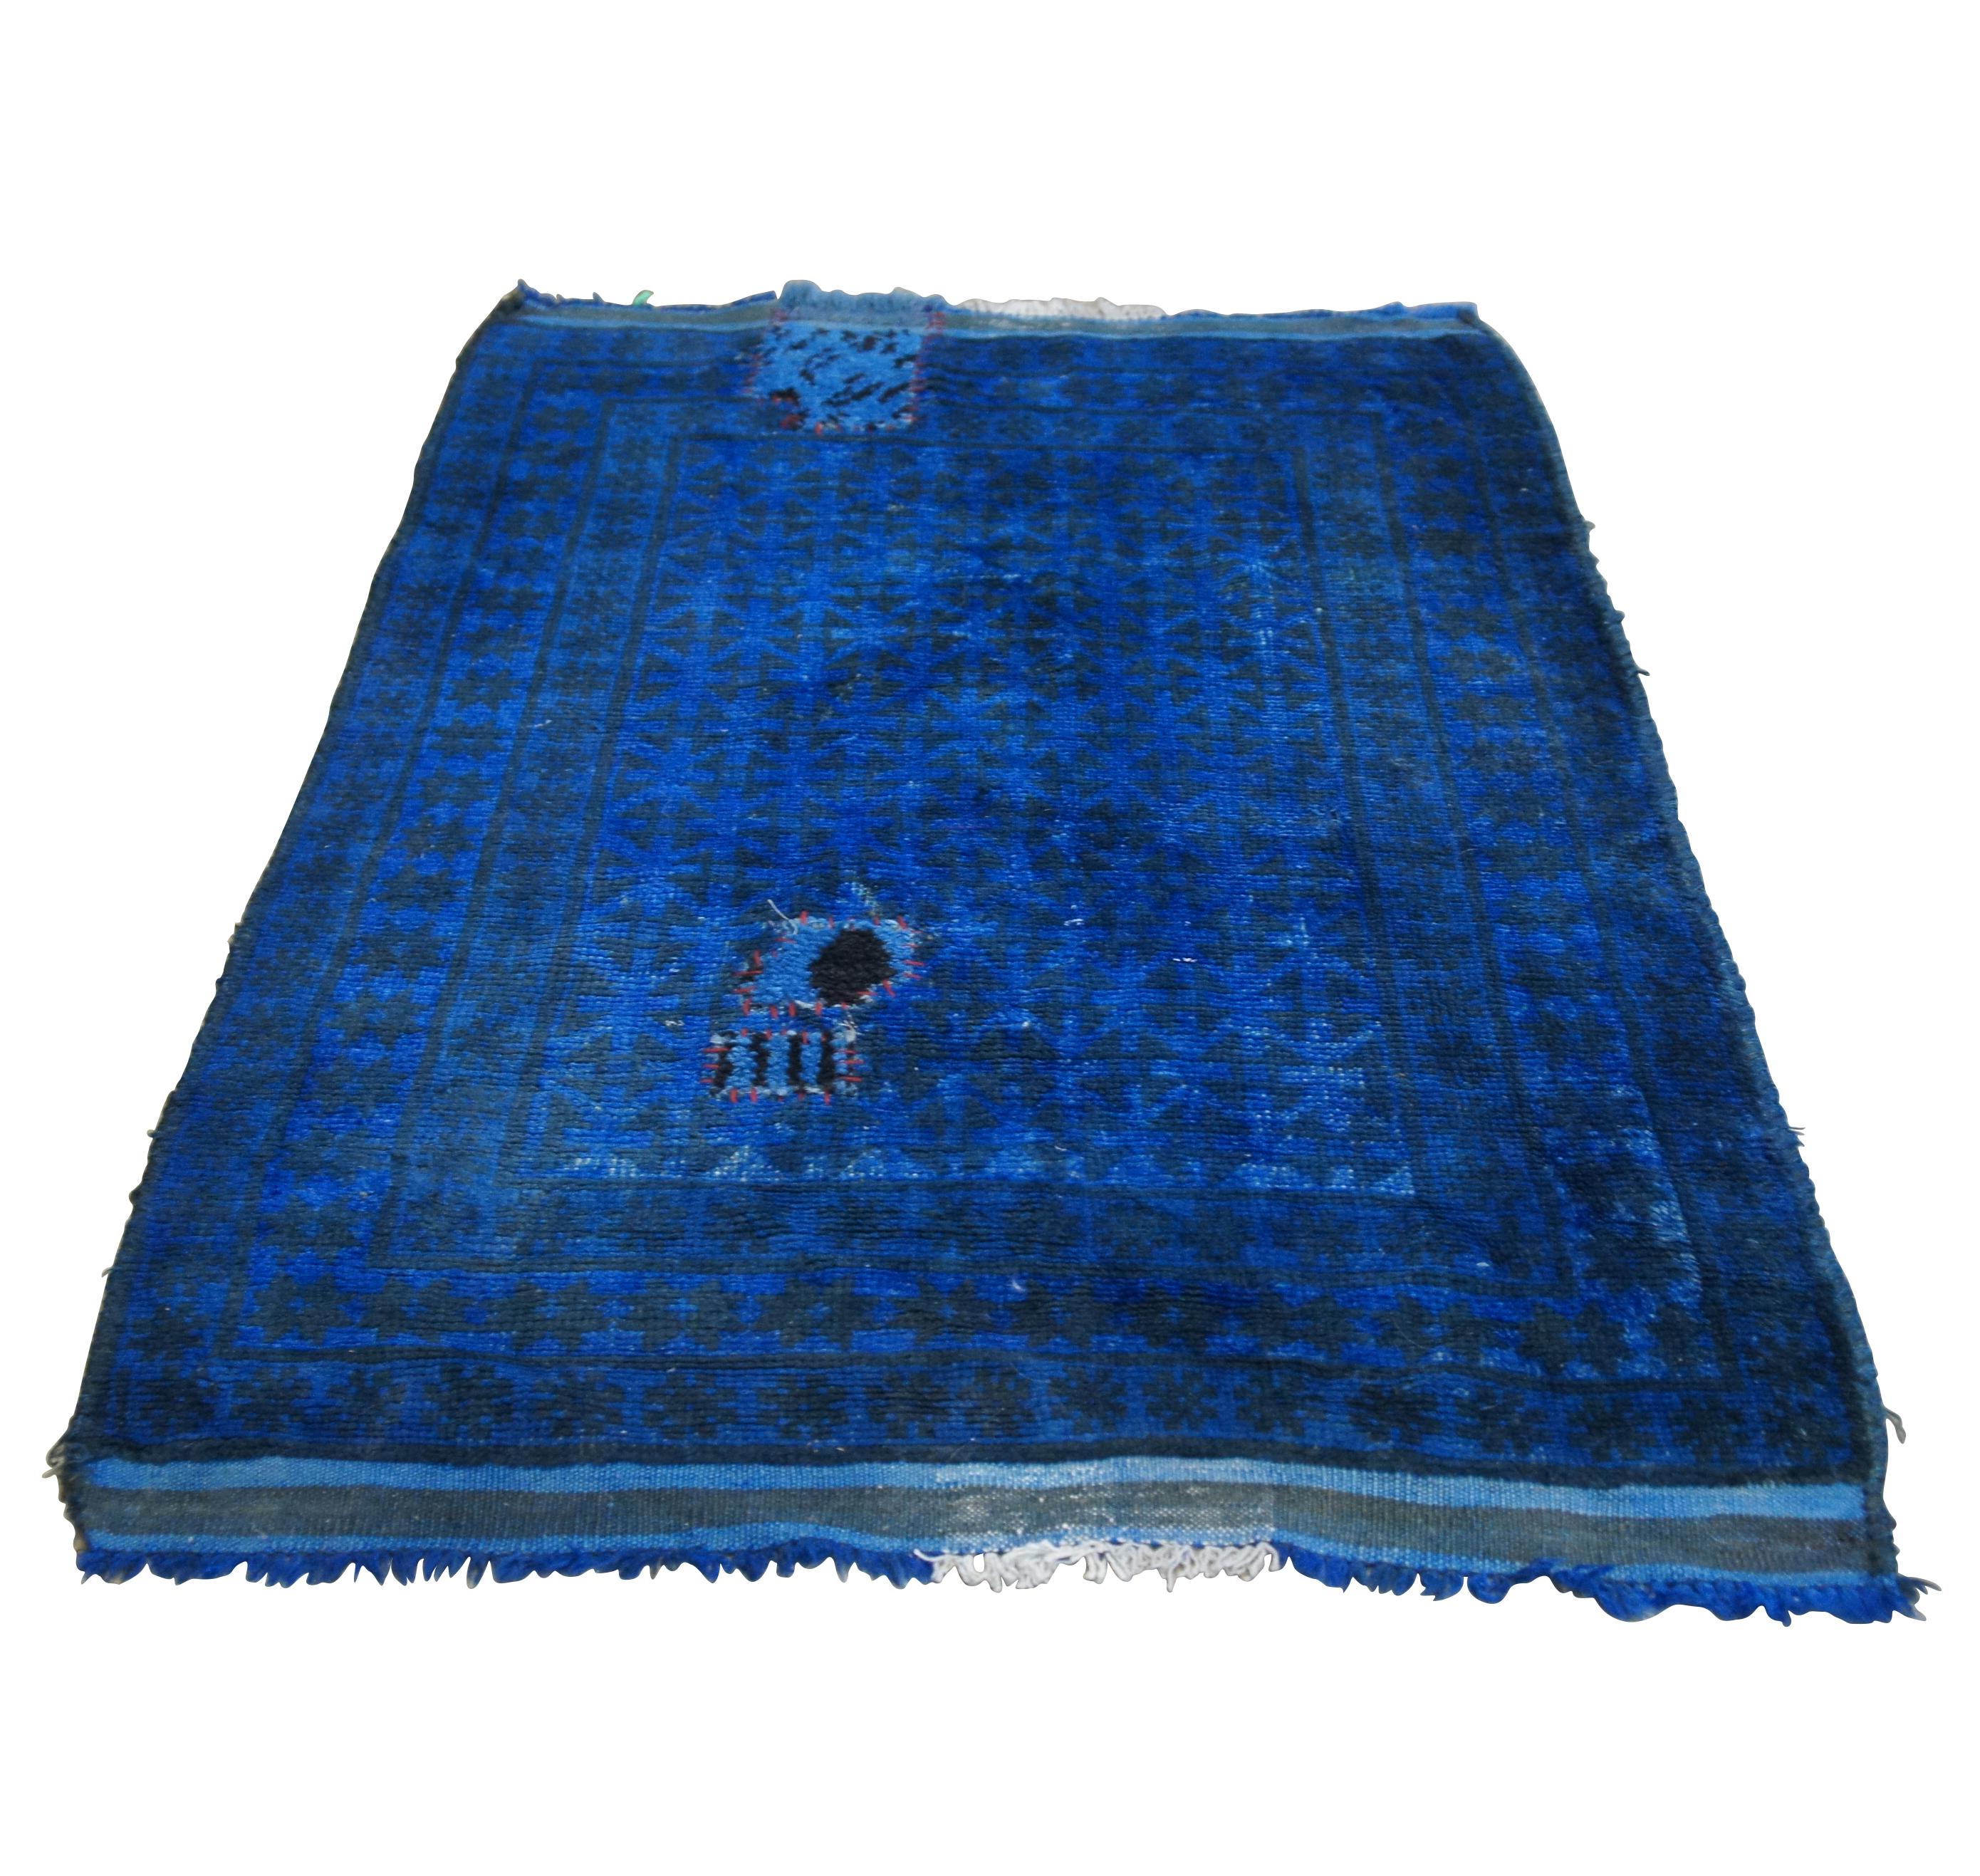 Islamic Vintage Pakistani Balouch Hand Knotted Wool Blue Geometric Prayer Rug Area Mat For Sale